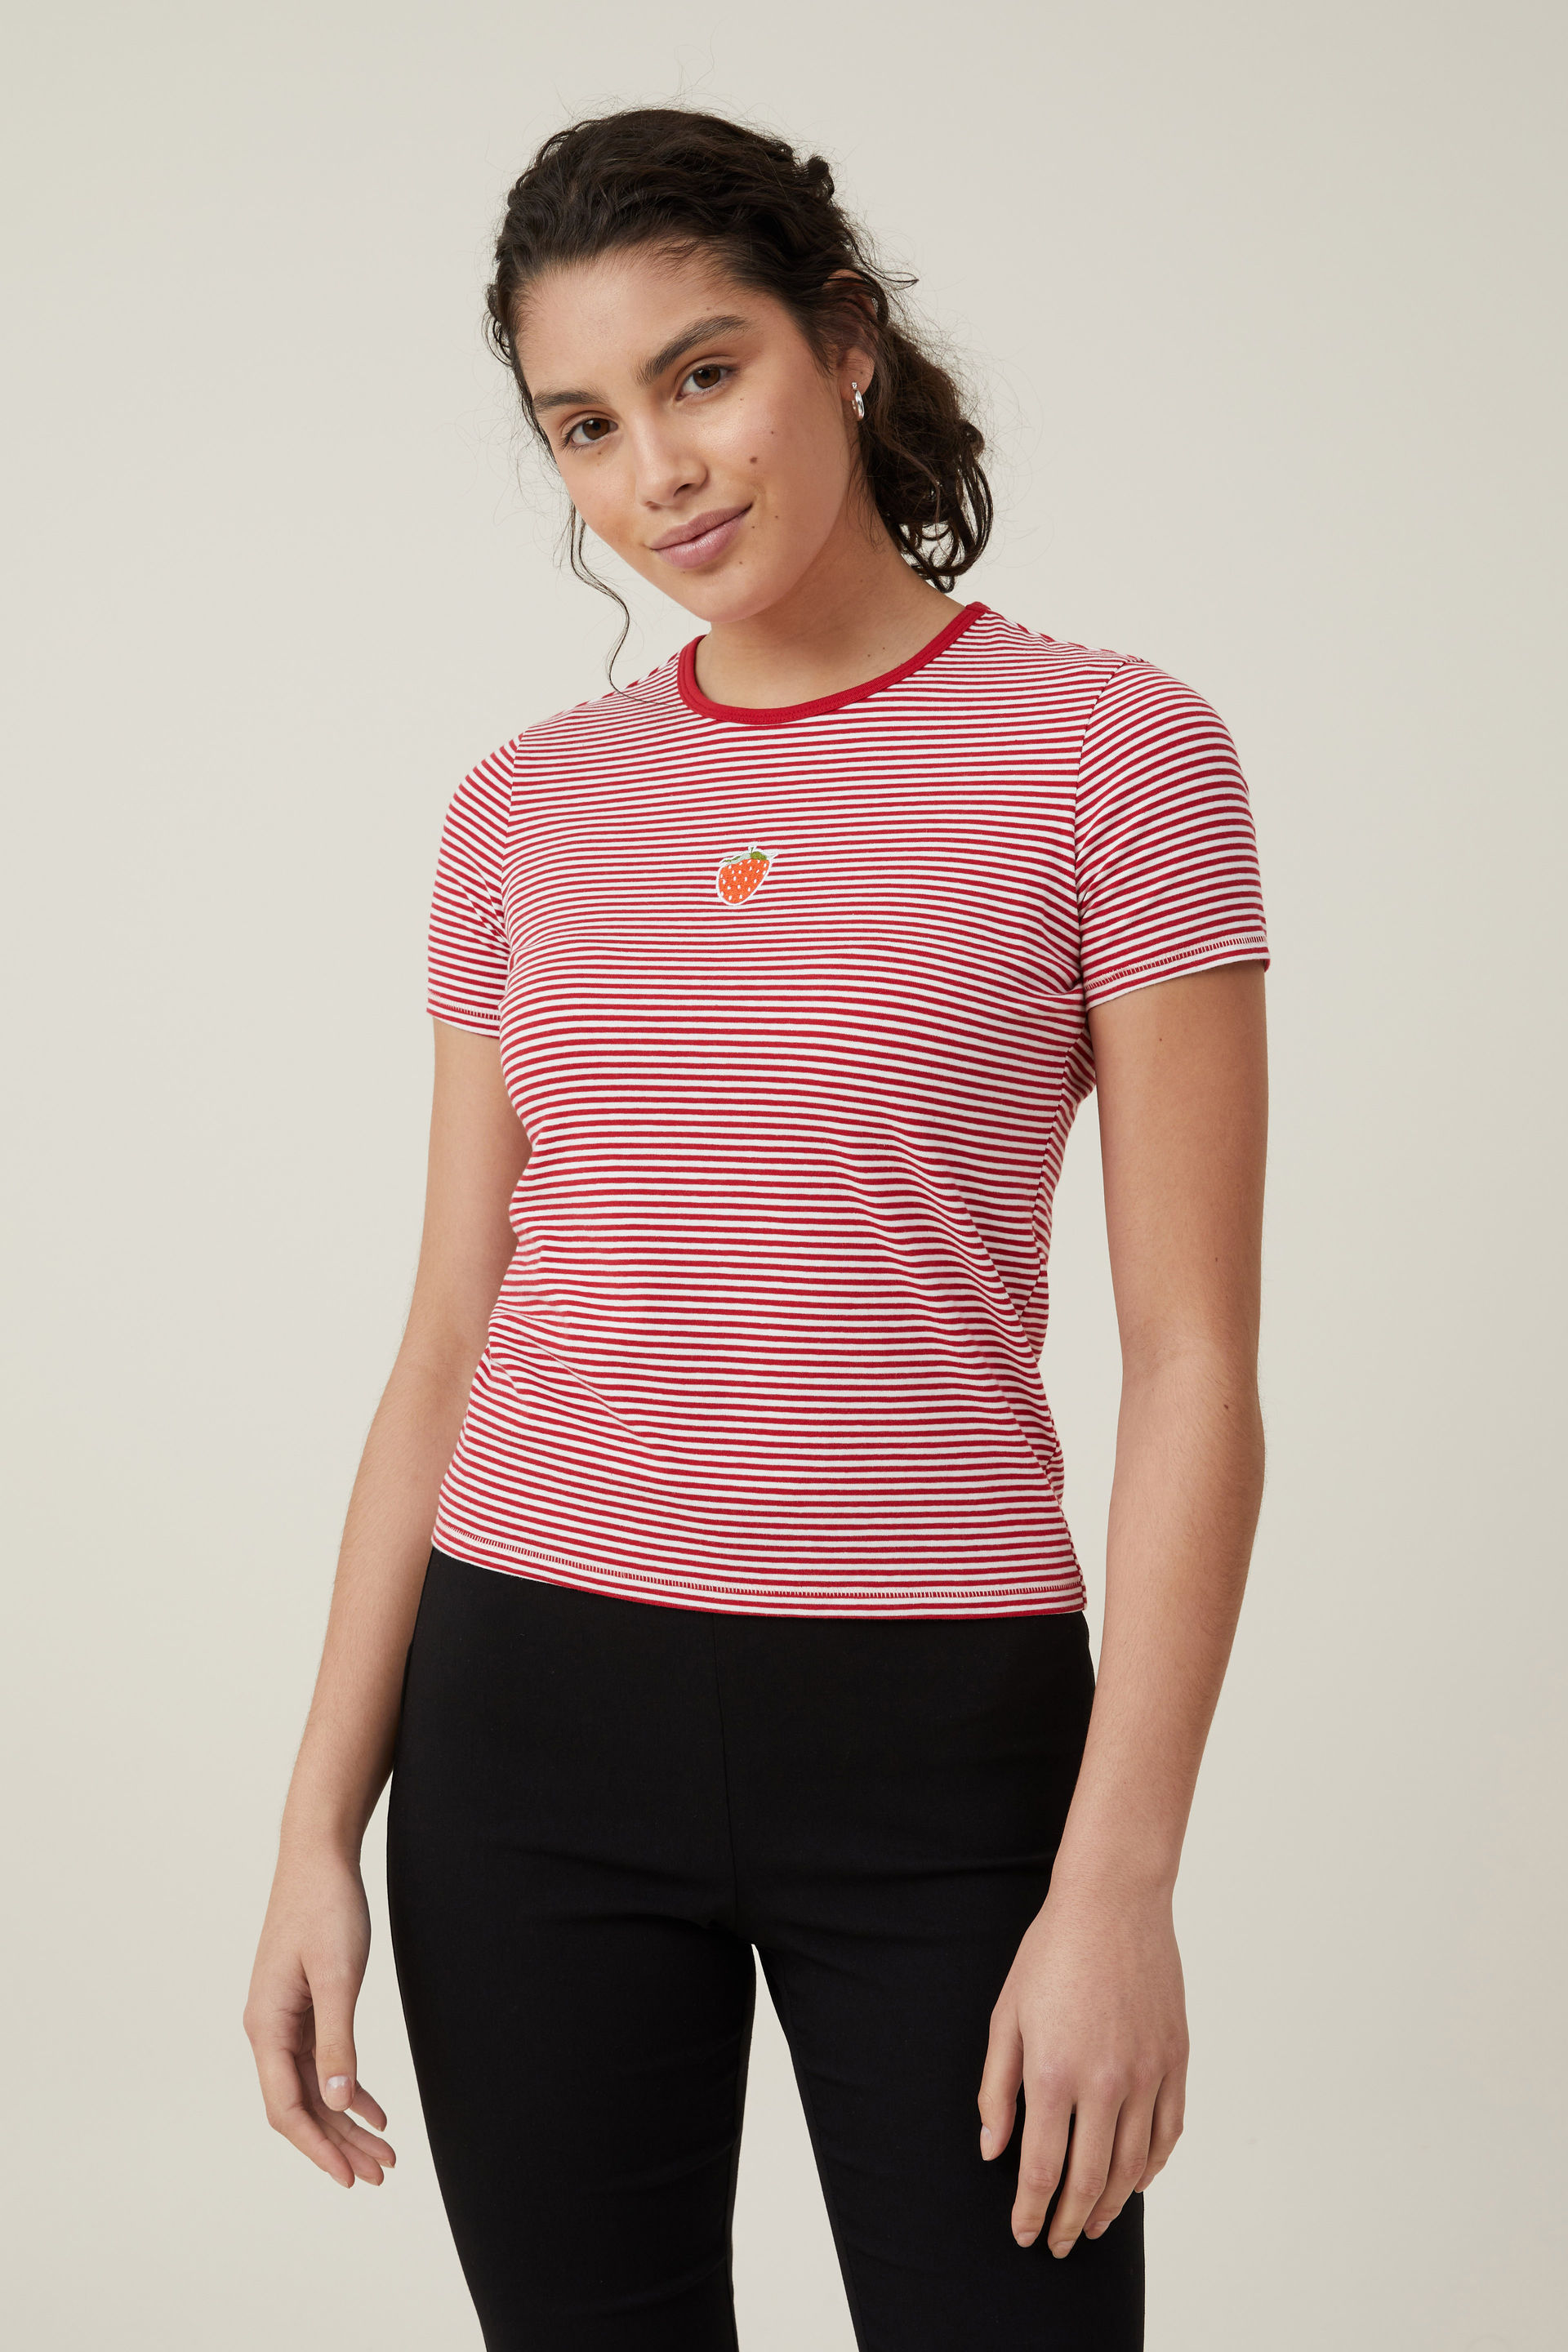 Cotton On Women - Fitted Graphic Longline Tee - Berry / red white stripe